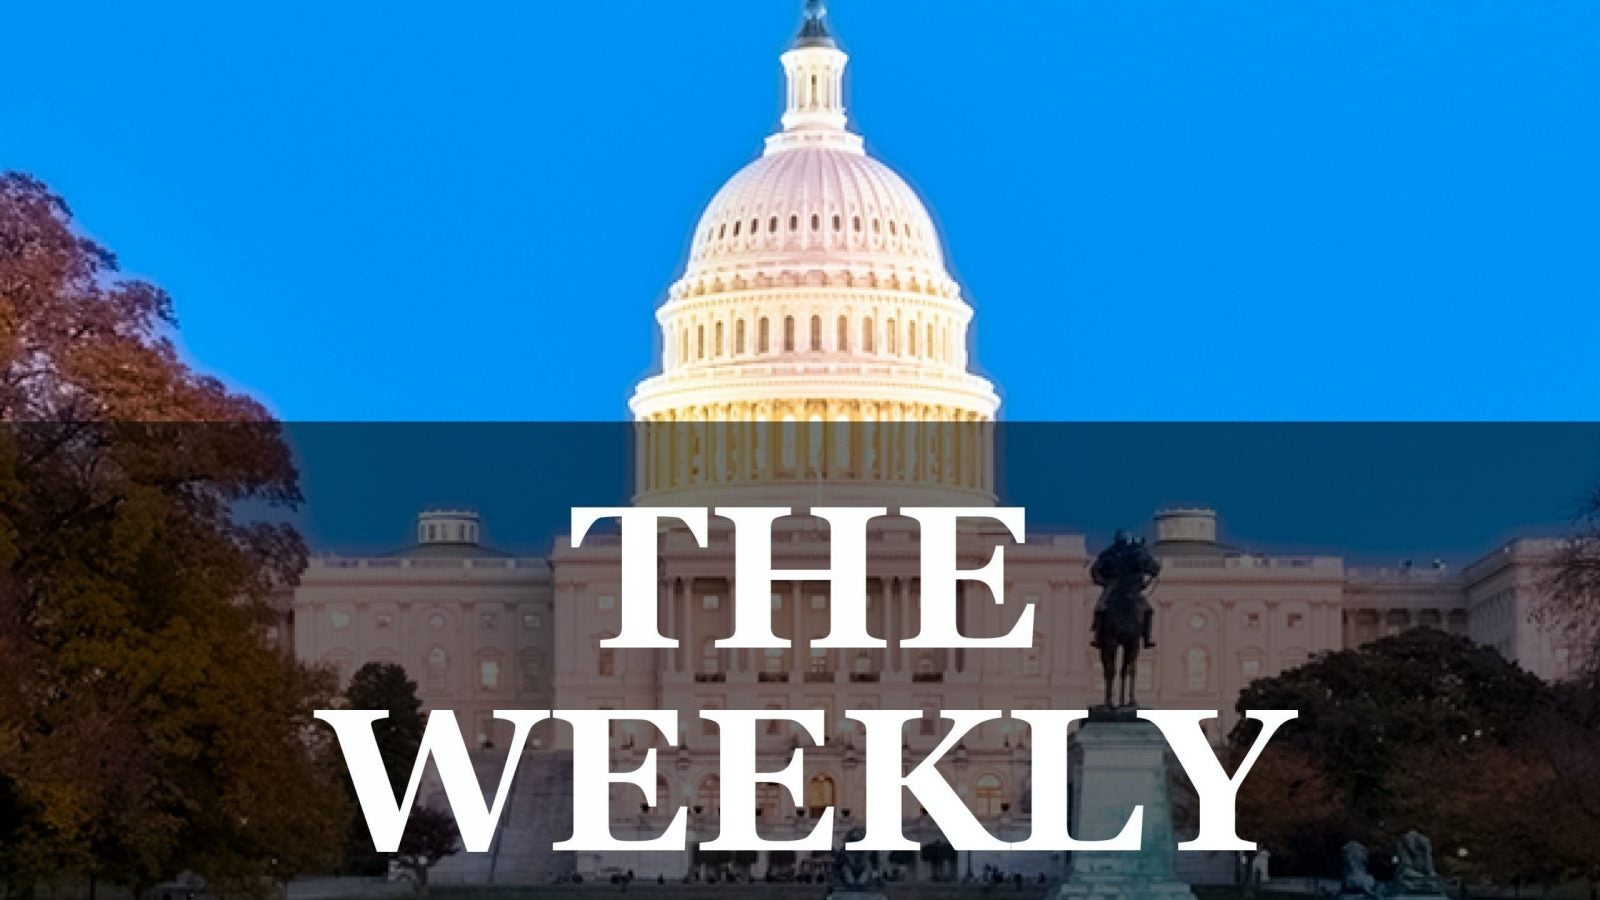 The US capitol overlaid with text reading &quot;The Weekly&quot;